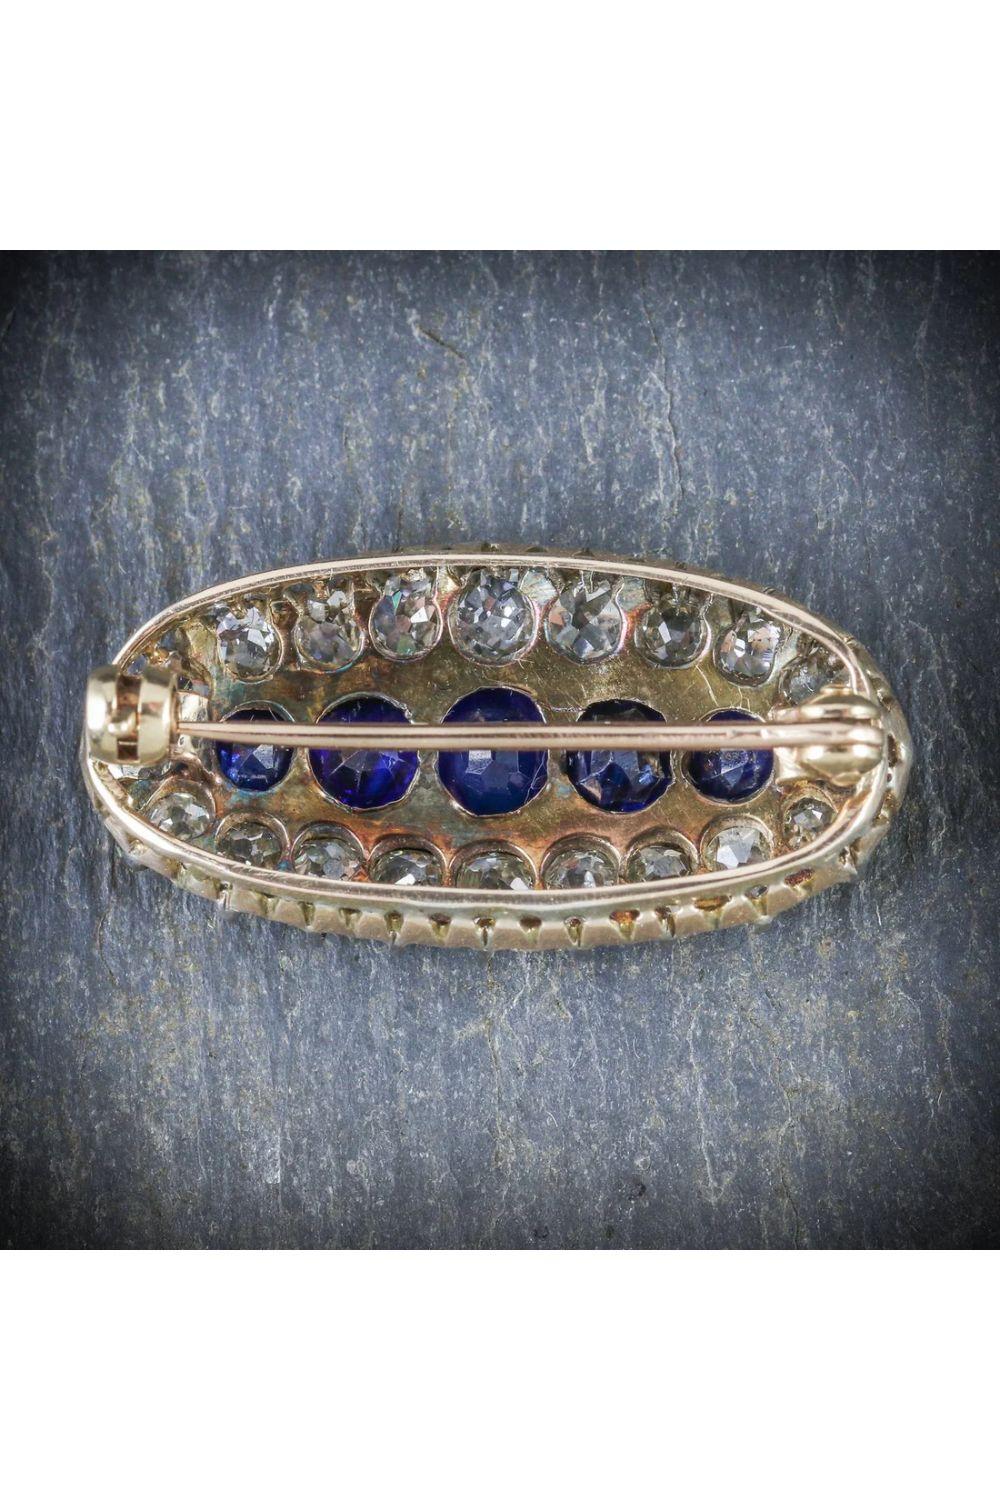 A stunning antique Victorian brooch pave set with five deep blue sapphires across the centre, framed in a border of twenty sparkling old mine cut diamonds. The sapphires graduate in size from 0.20 to 0.50ct (approx. 1.5ct total) and the diamonds